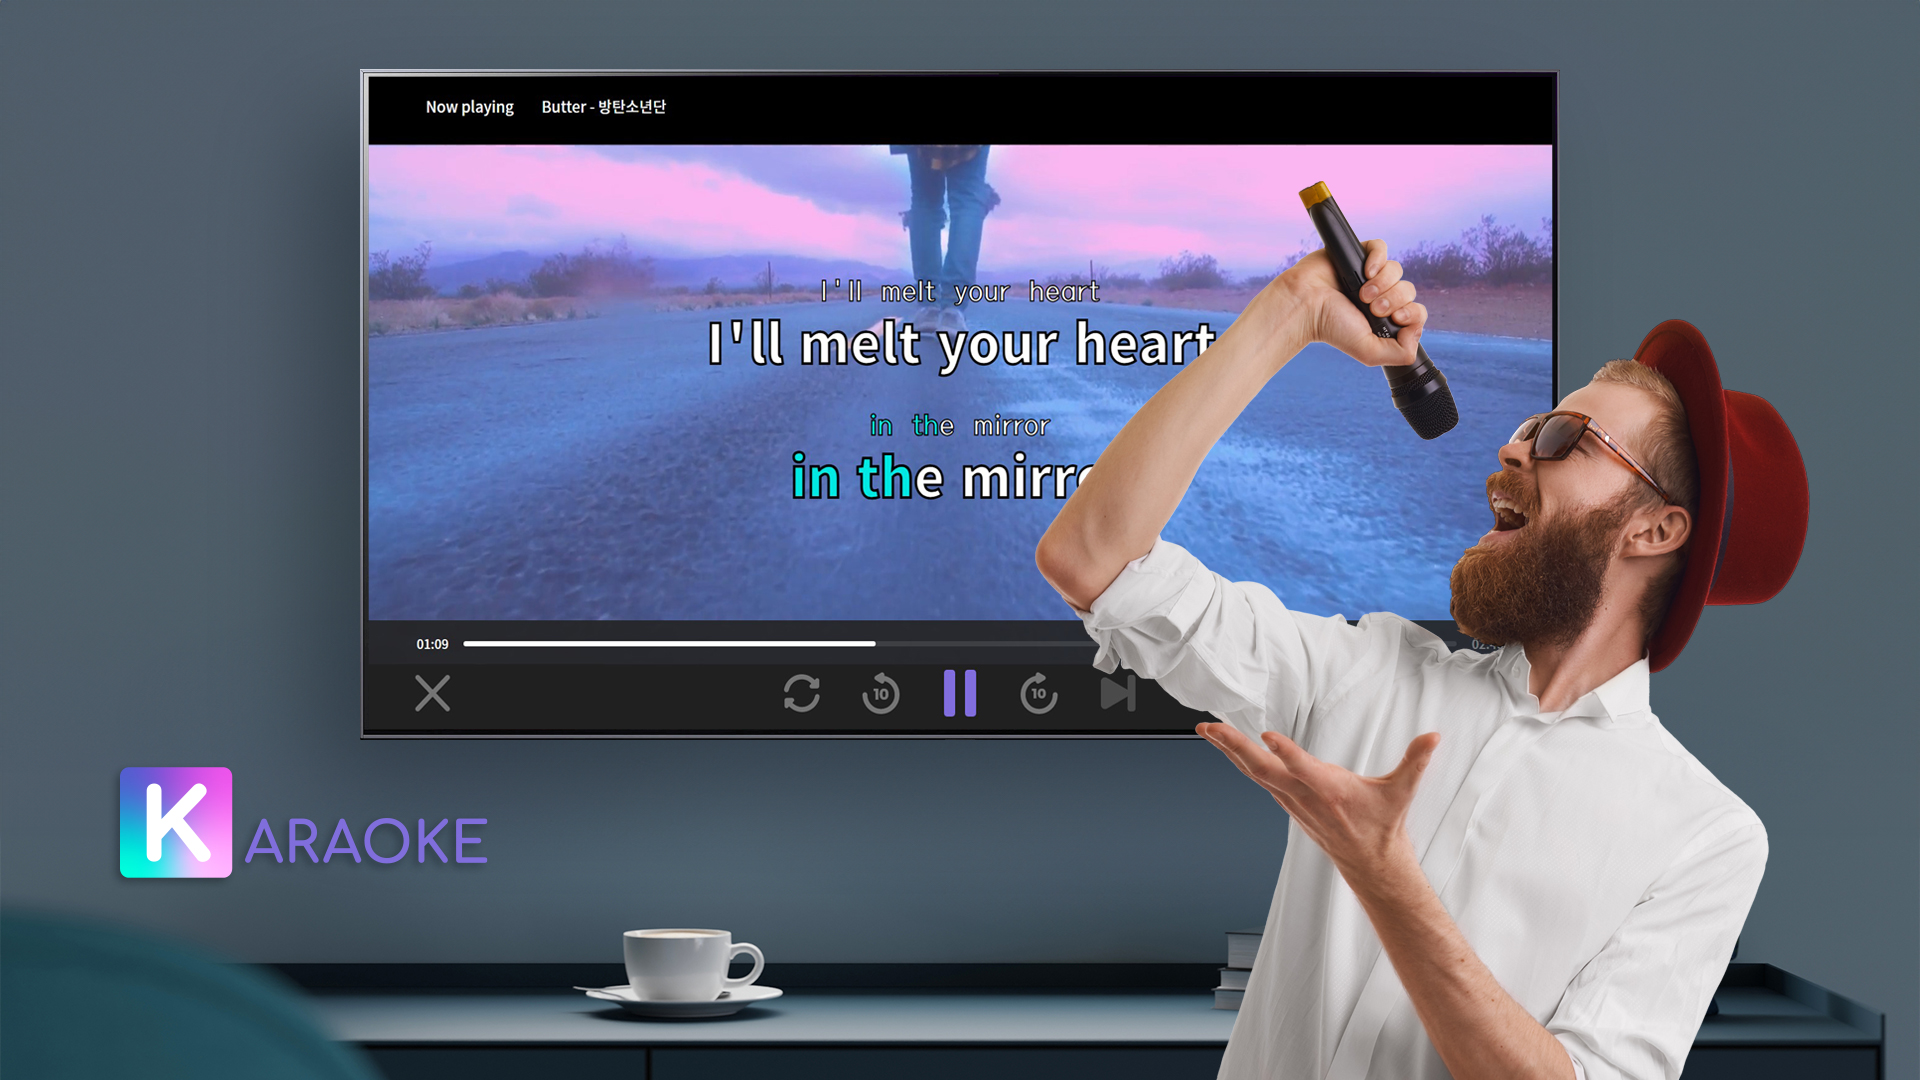 A man singing enthusiastically into a microphone using the K-araoke service on his LG Smart TV.